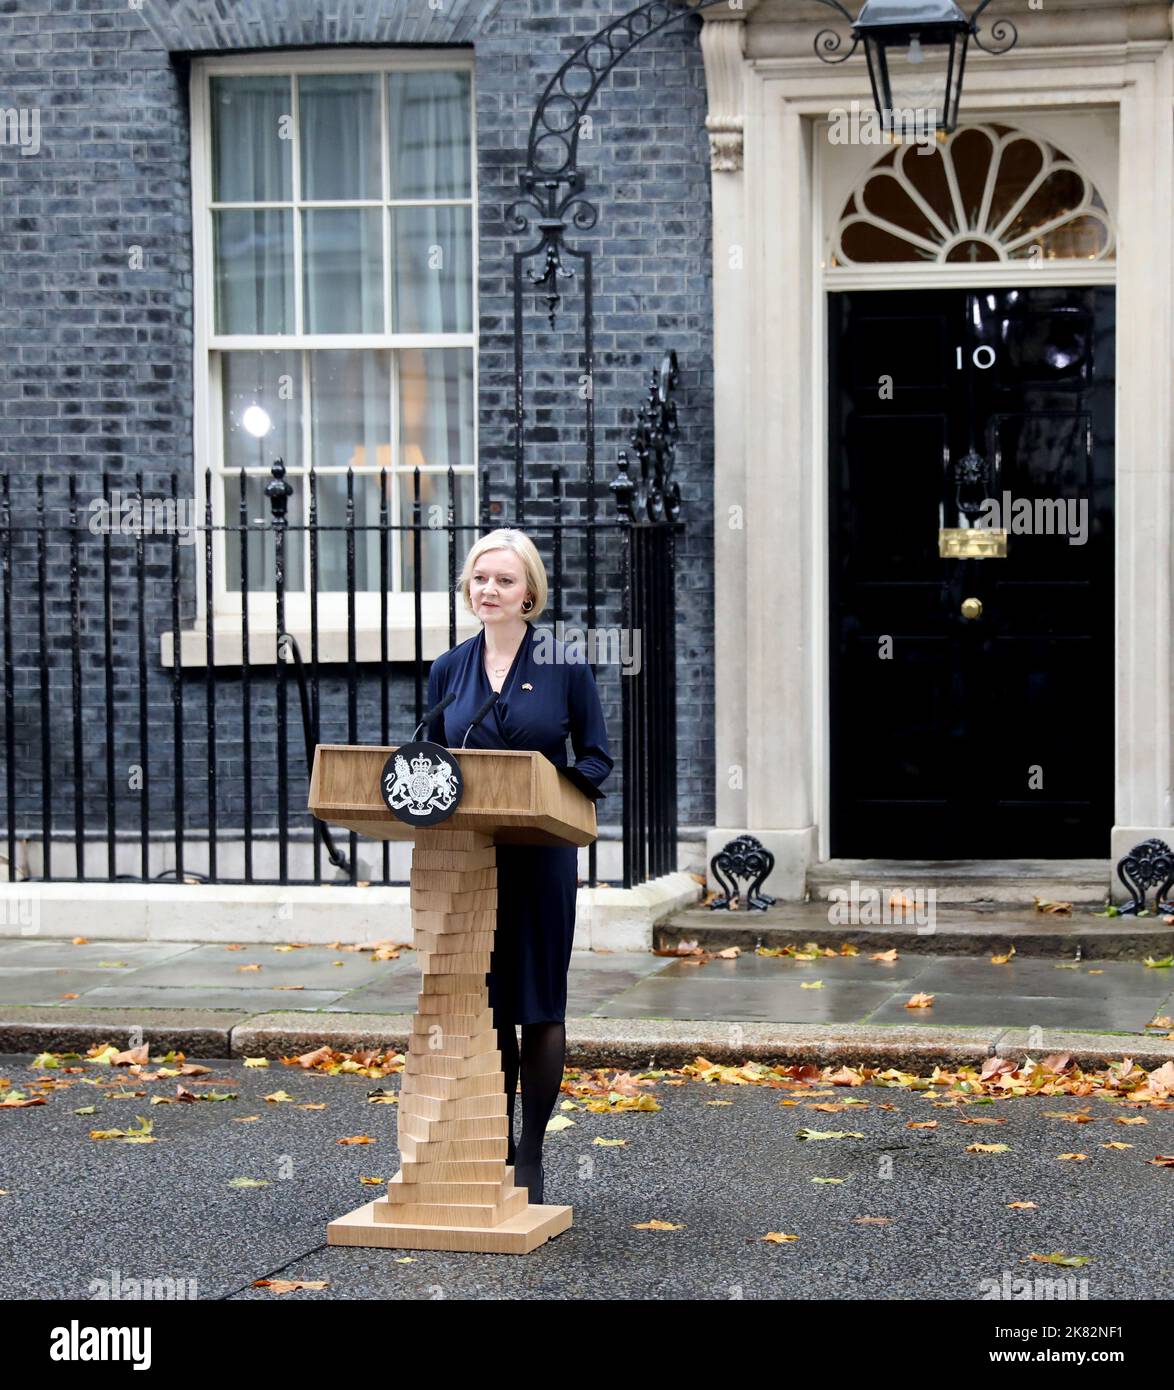 London, UK. 20th Oct, 2022. (221020) -- LONDON, Oct. 20, 2022 (Xinhua) -- United Kingdom (UK) Prime Minister Liz Truss makes a statement outside 10 Downing Street in London, Britain, Oct. 20, 2022.  Truss resigned on Thursday after just a little over six weeks in office and thus became the shortest-serving prime minister in the country's history. (Xinhua/Li Ying) Credit: Xinhua/Alamy Live News Stock Photo